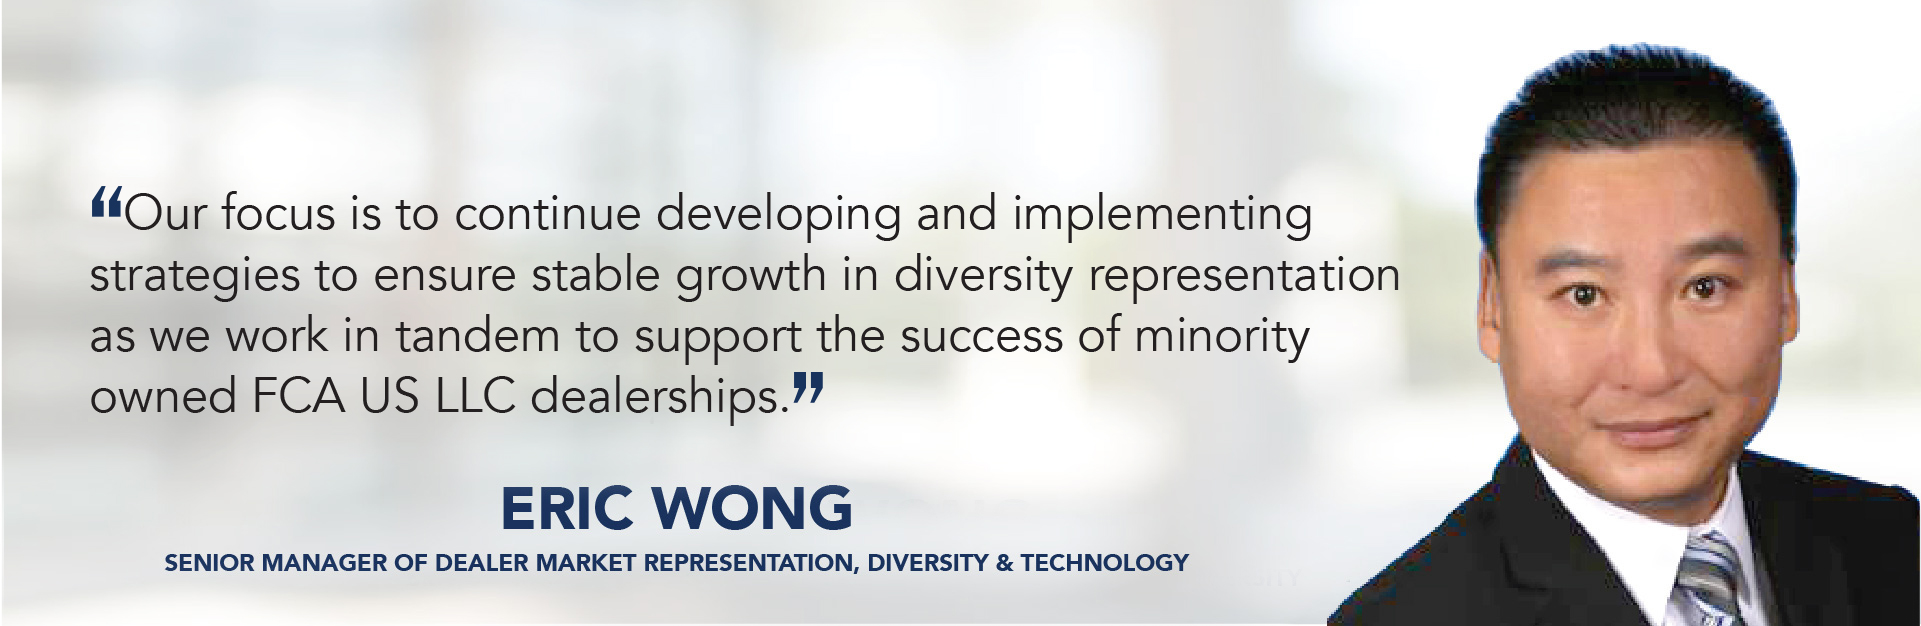 Our focus is to continue developing and implementing  strategies to ensure stable growth in diversity representation as we work in tandem to support the success of minority owned FCA US LLC dealerships. - Eric Wong